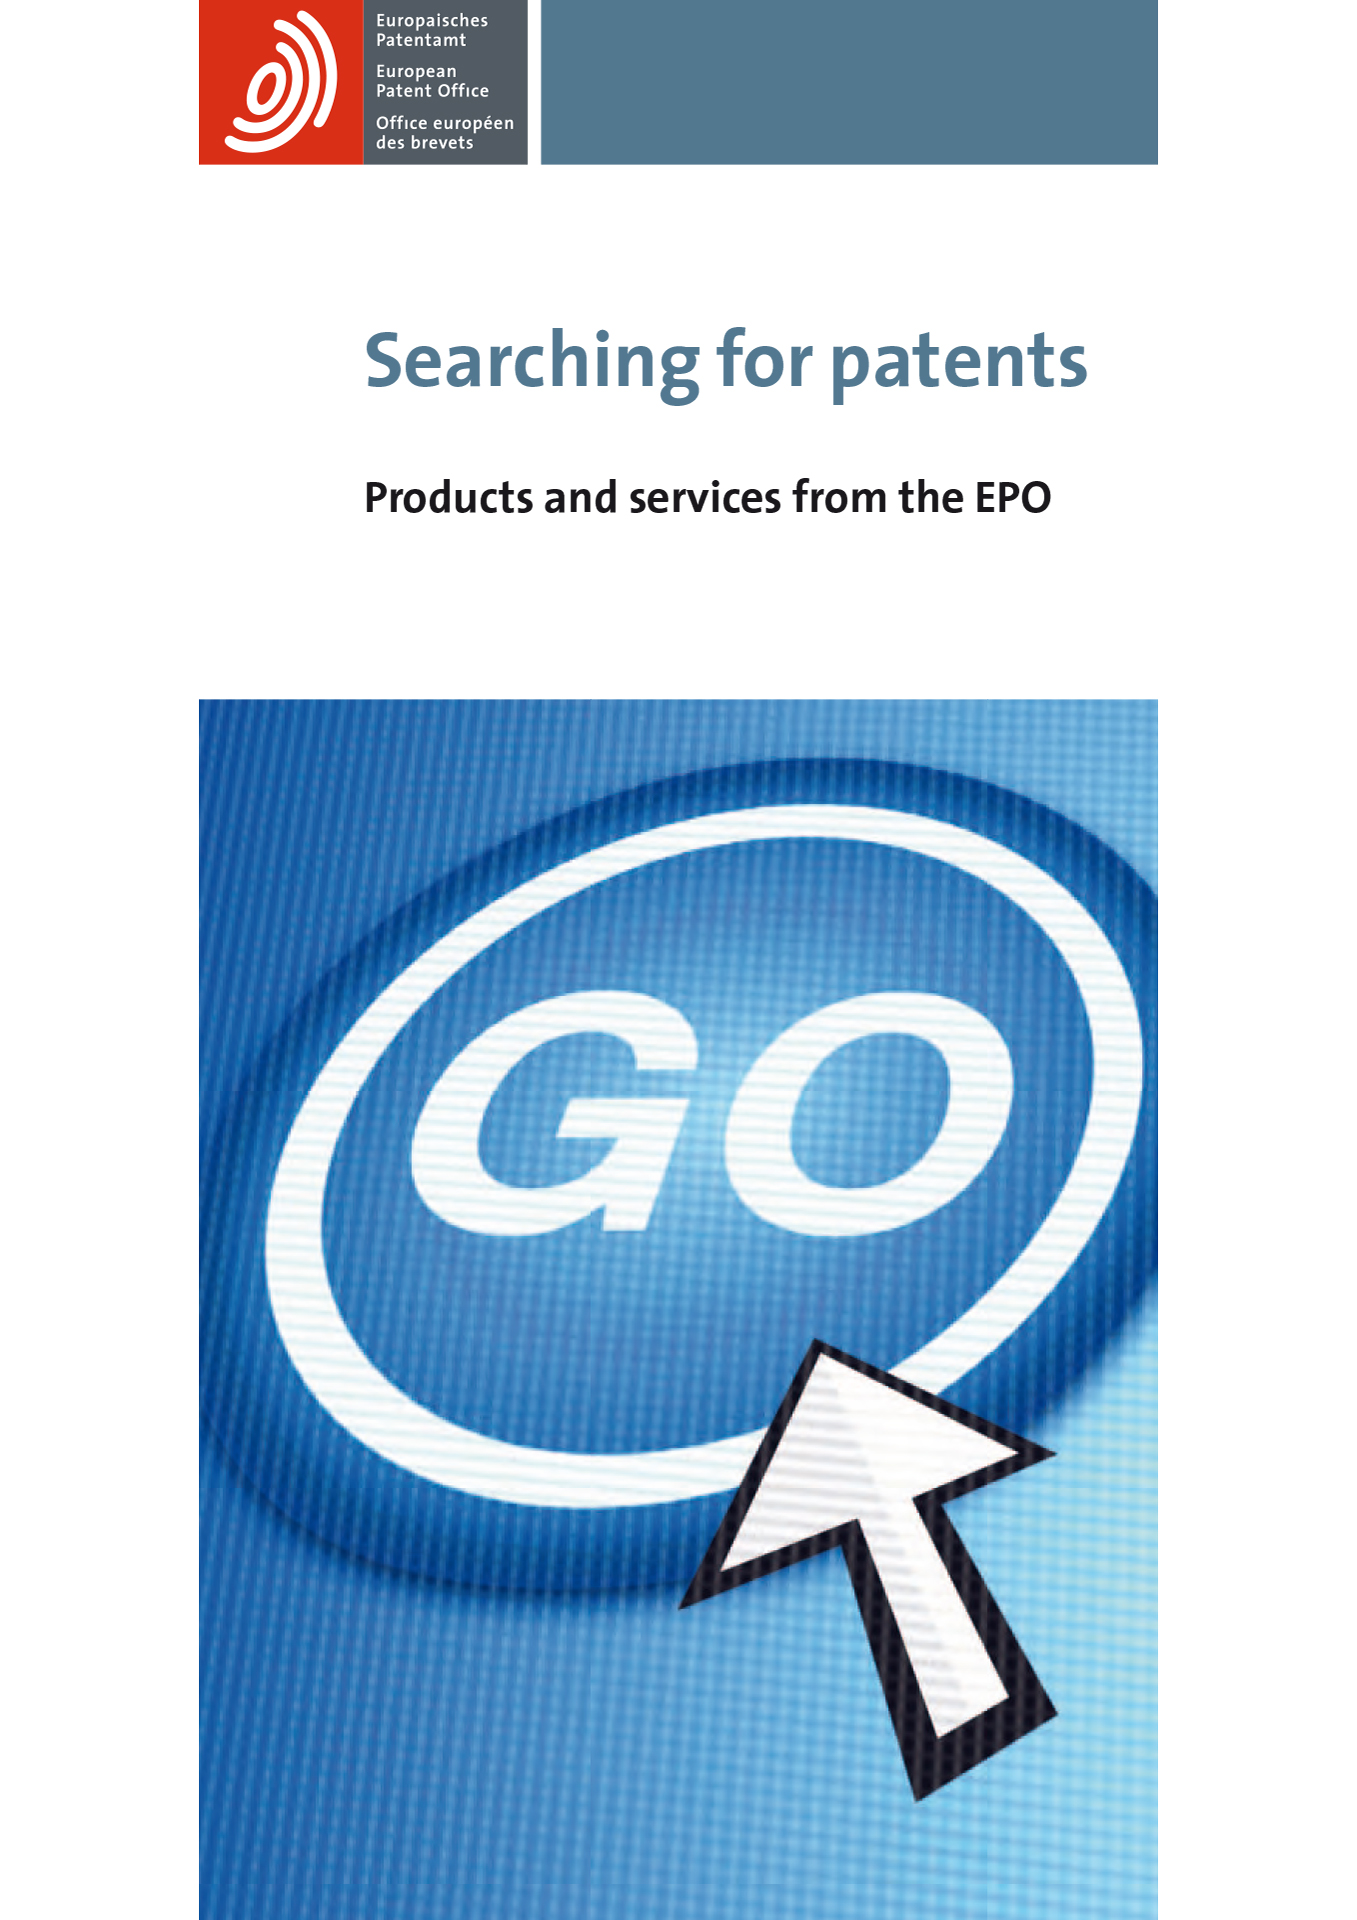 EPO publication cover - blue background with an arrow pointing to the word GO in a circle and 